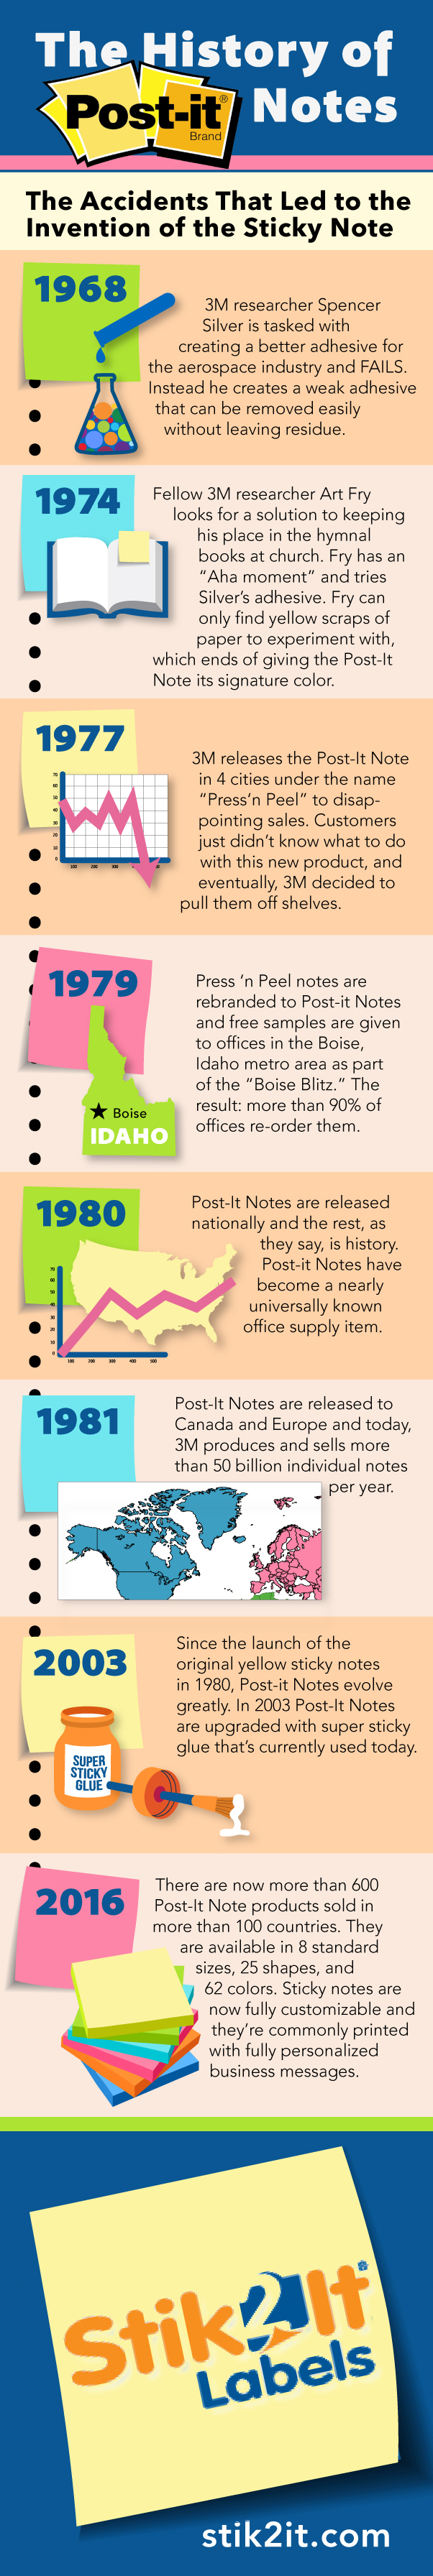 The History of Post-It Notes Infographic